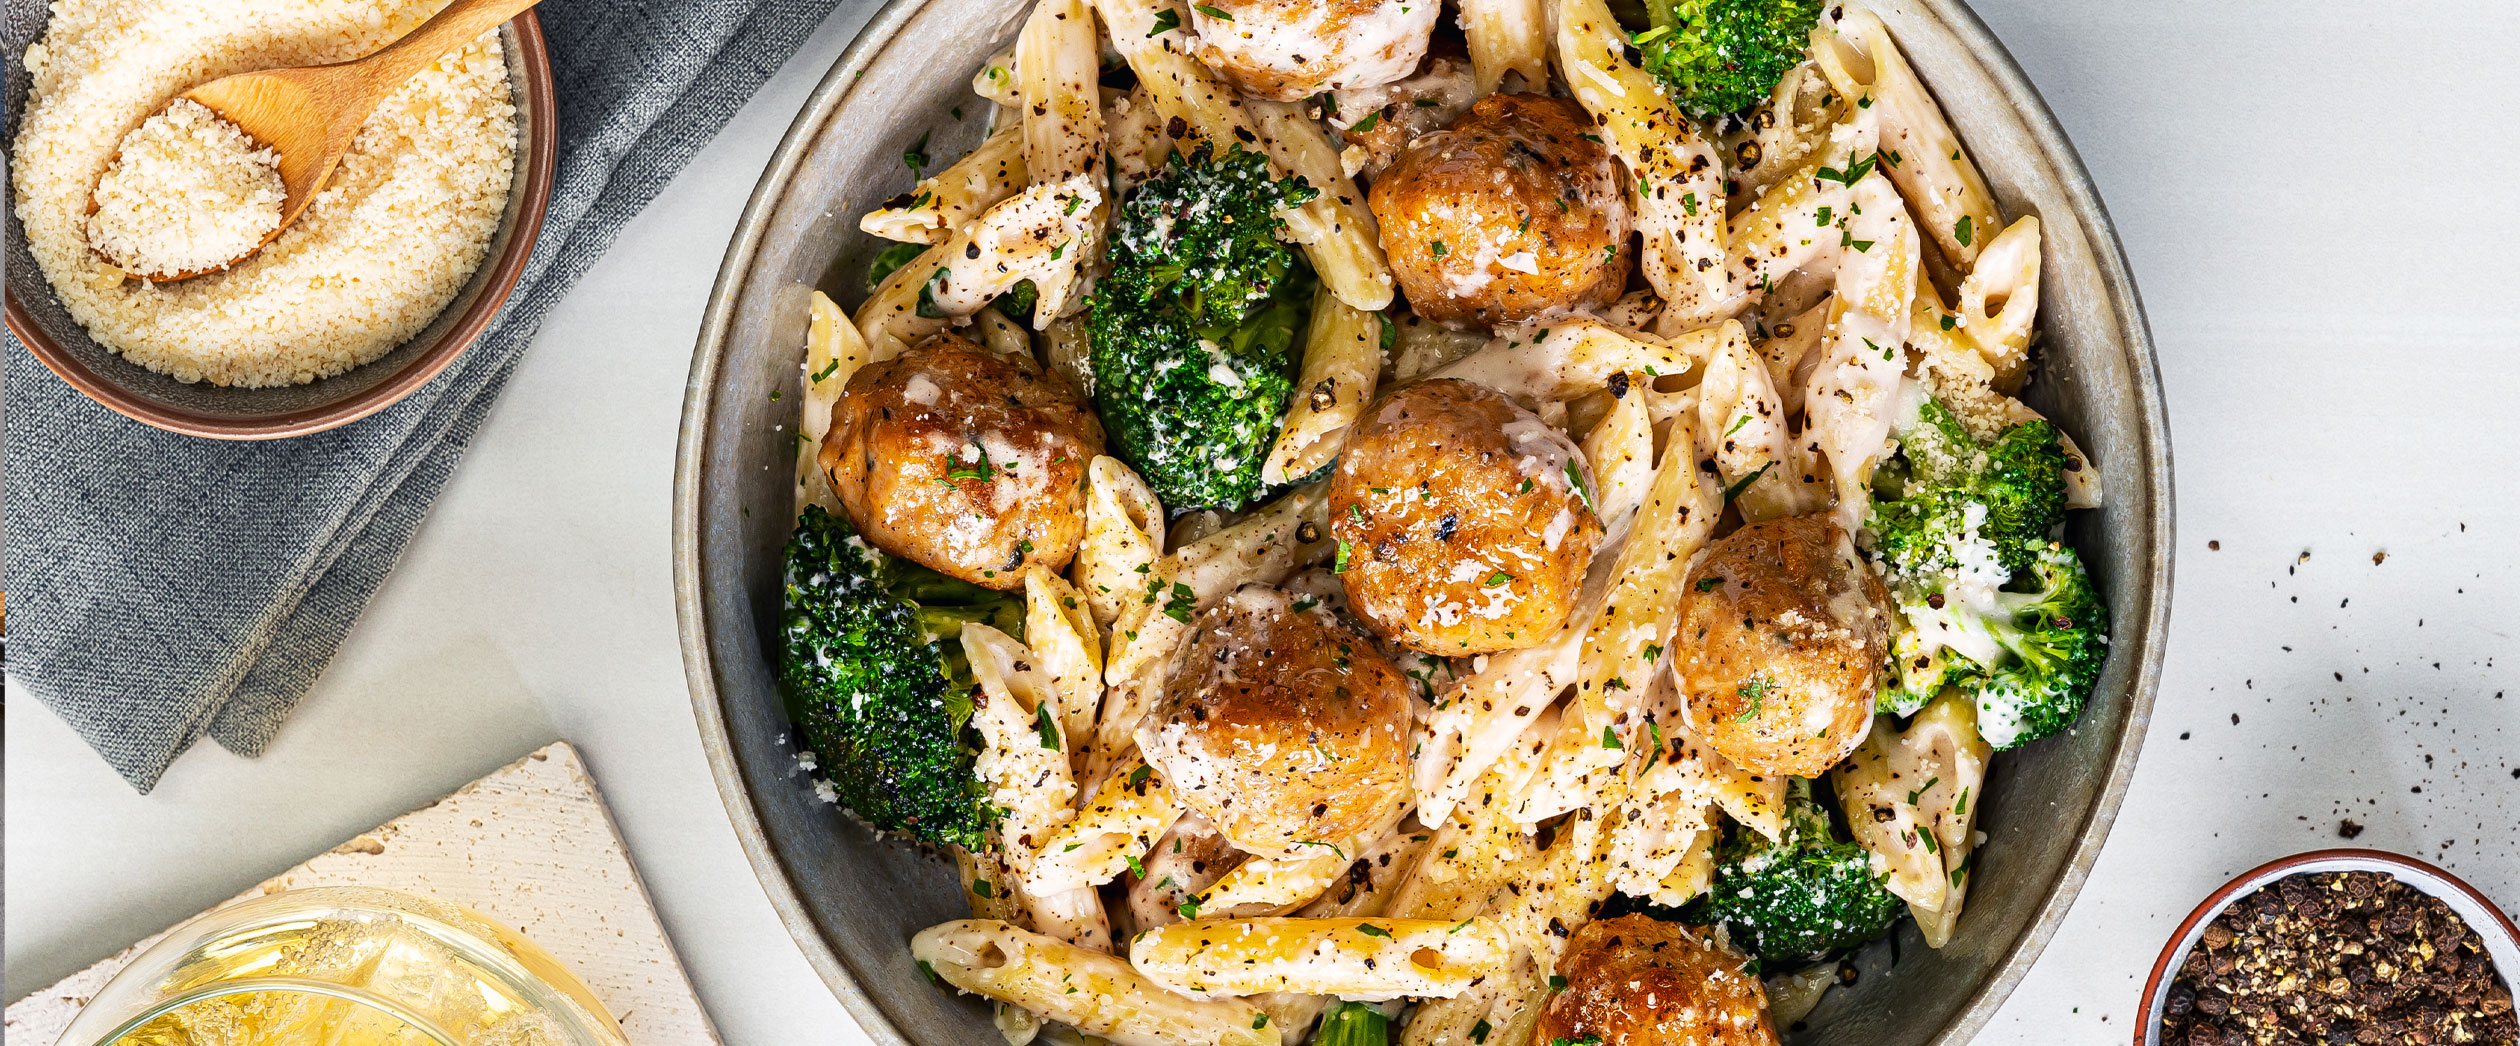 Bowl of Al Fresco chicken meatballs and broccoli and penne dish